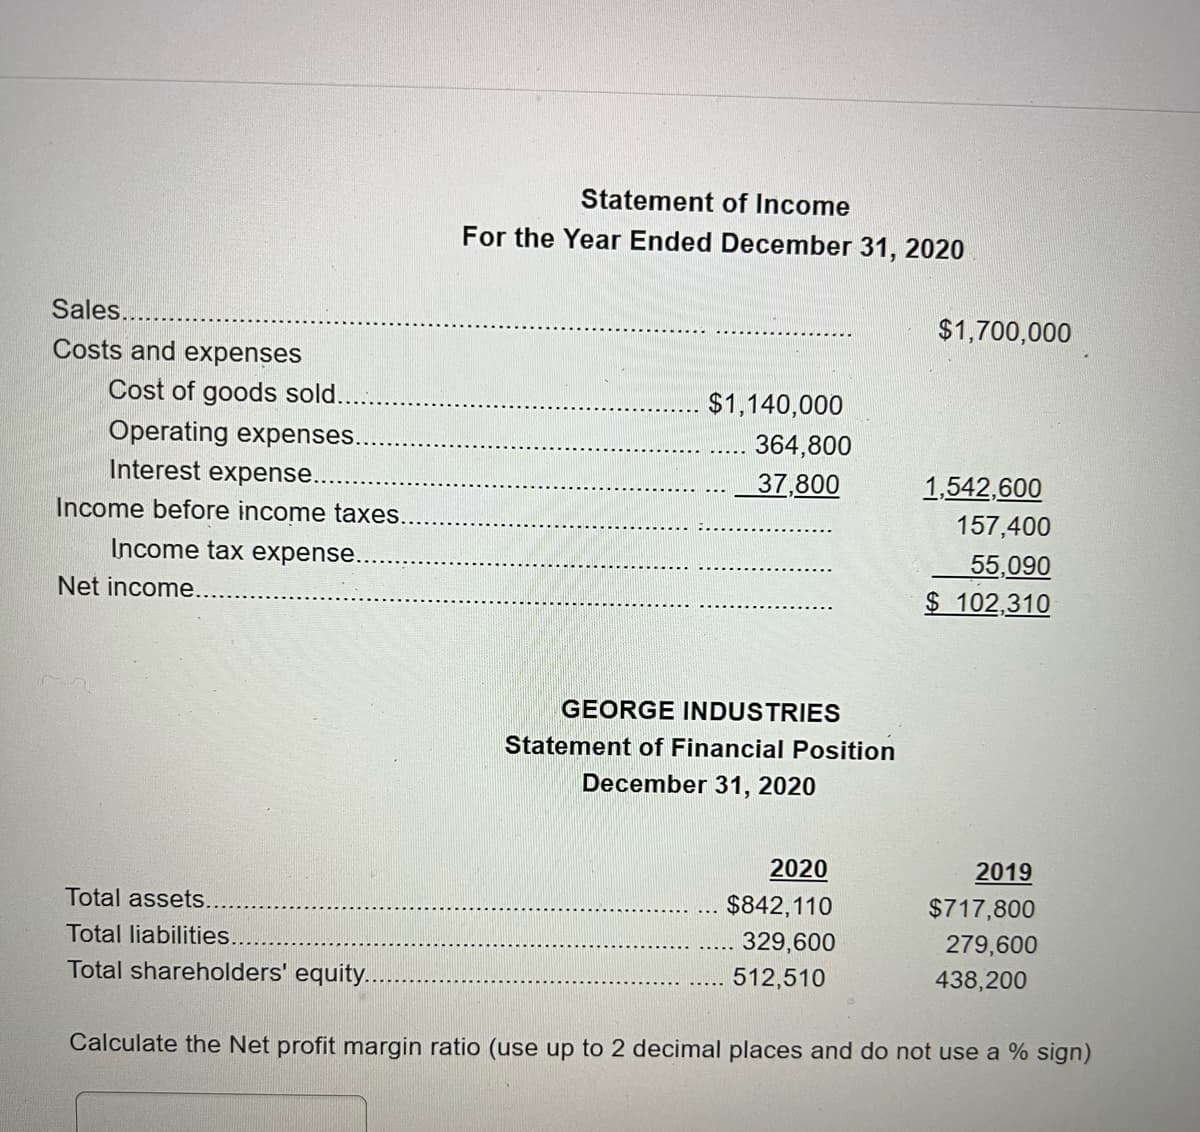 Sales.
Costs and expenses
Cost of goods sold.
Operating expenses.
Interest expense...
Income before income taxes.
Income tax expense..
Net income..
Statement of Income
For the Year Ended December 31, 2020
$1,140,000
$1,700,000
364,800
37,800
1,542,600
157,400
55,090
$ 102,310
GEORGE INDUSTRIES
Statement of Financial Position
December 31, 2020
Total assets.
Total liabilities..
Total shareholders' equity...
2020
2019
$842,110
$717,800
329,600
279,600
512,510
438,200
Calculate the Net profit margin ratio (use up to 2 decimal places and do not use a % sign)